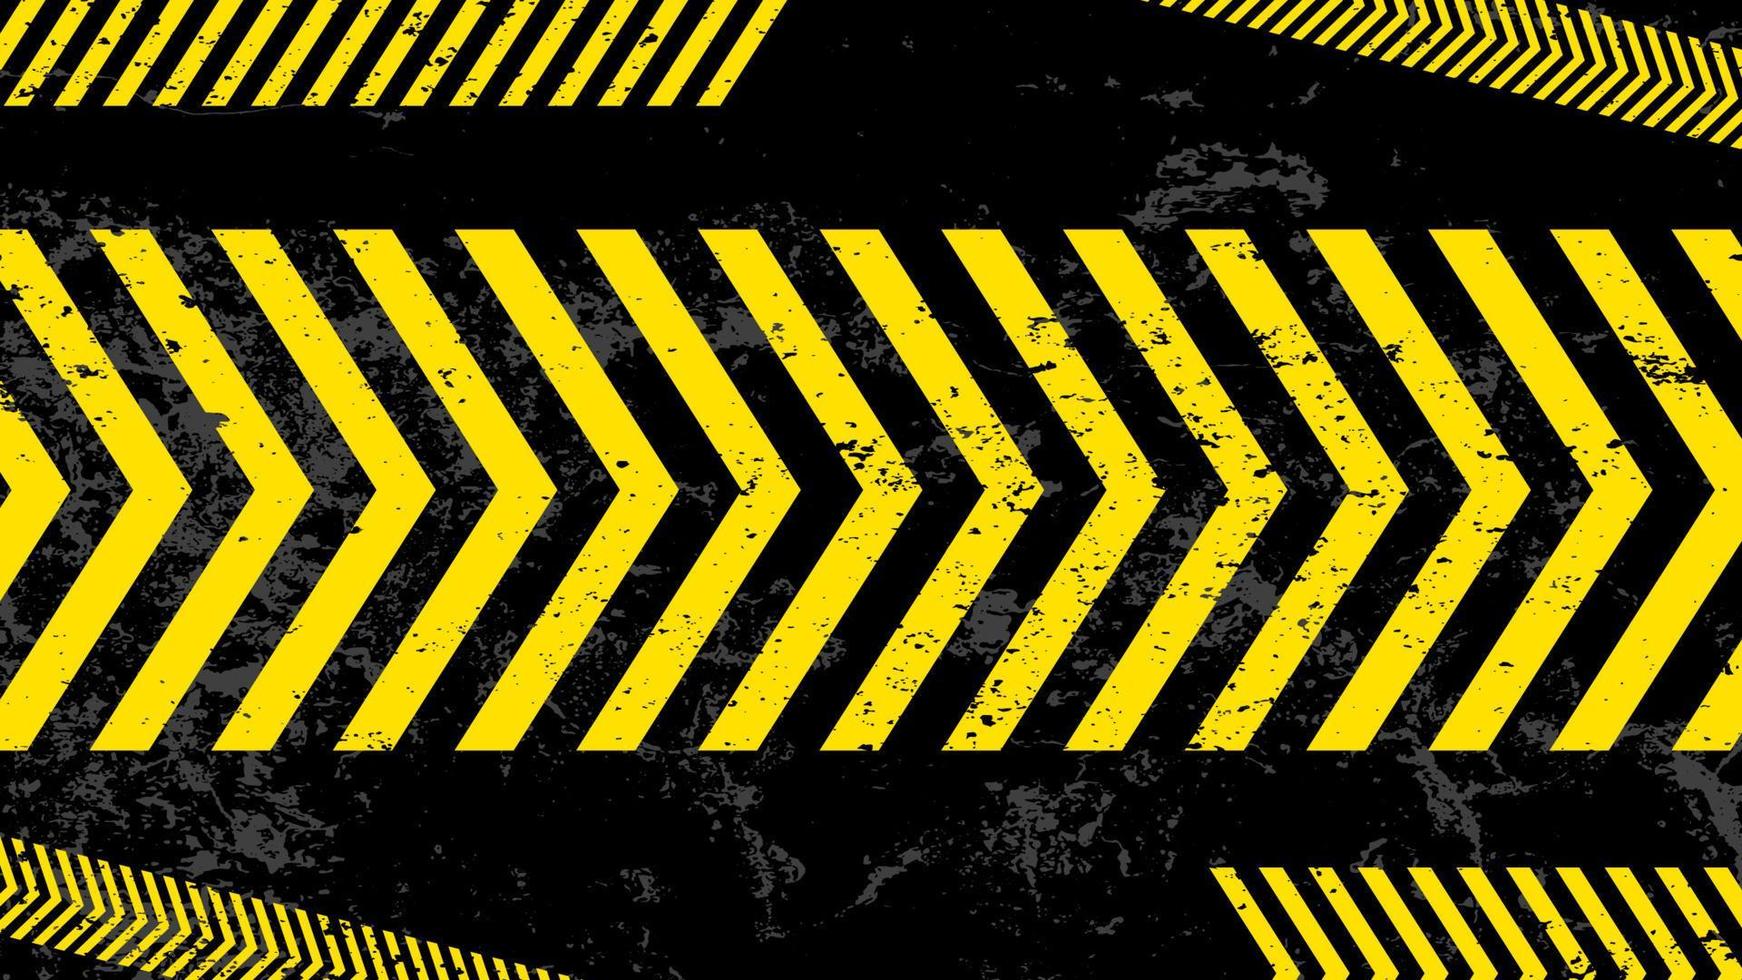 A grungy and worn hazard stripes texture. Abstract warning striped rectangular background, yellow and black stripes on the diagonal, a warning to be careful vector